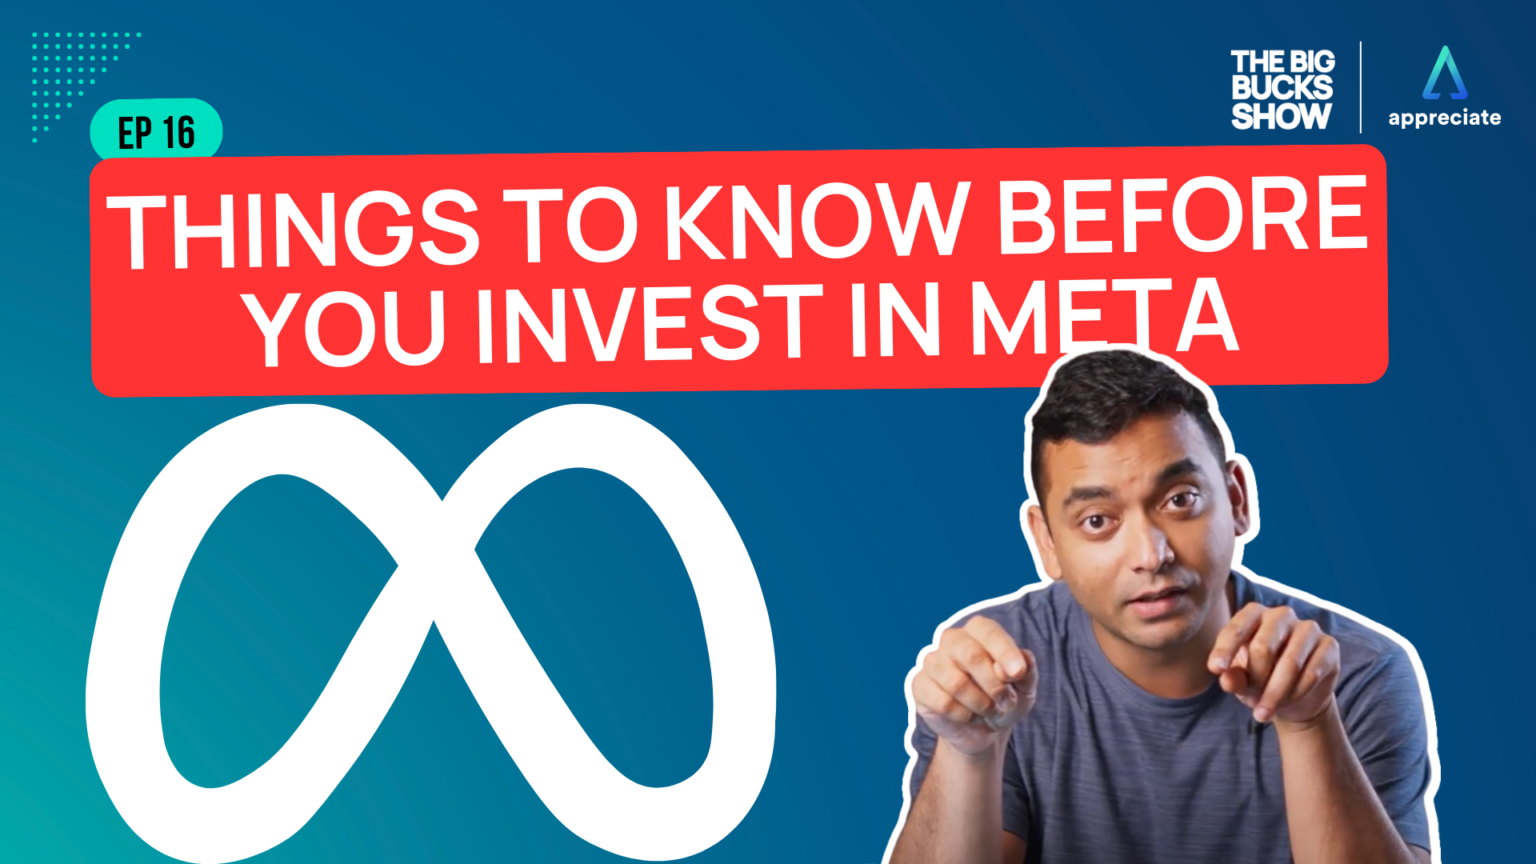 Episode 16 - Things to know before you invest in Meta - Thumbnail